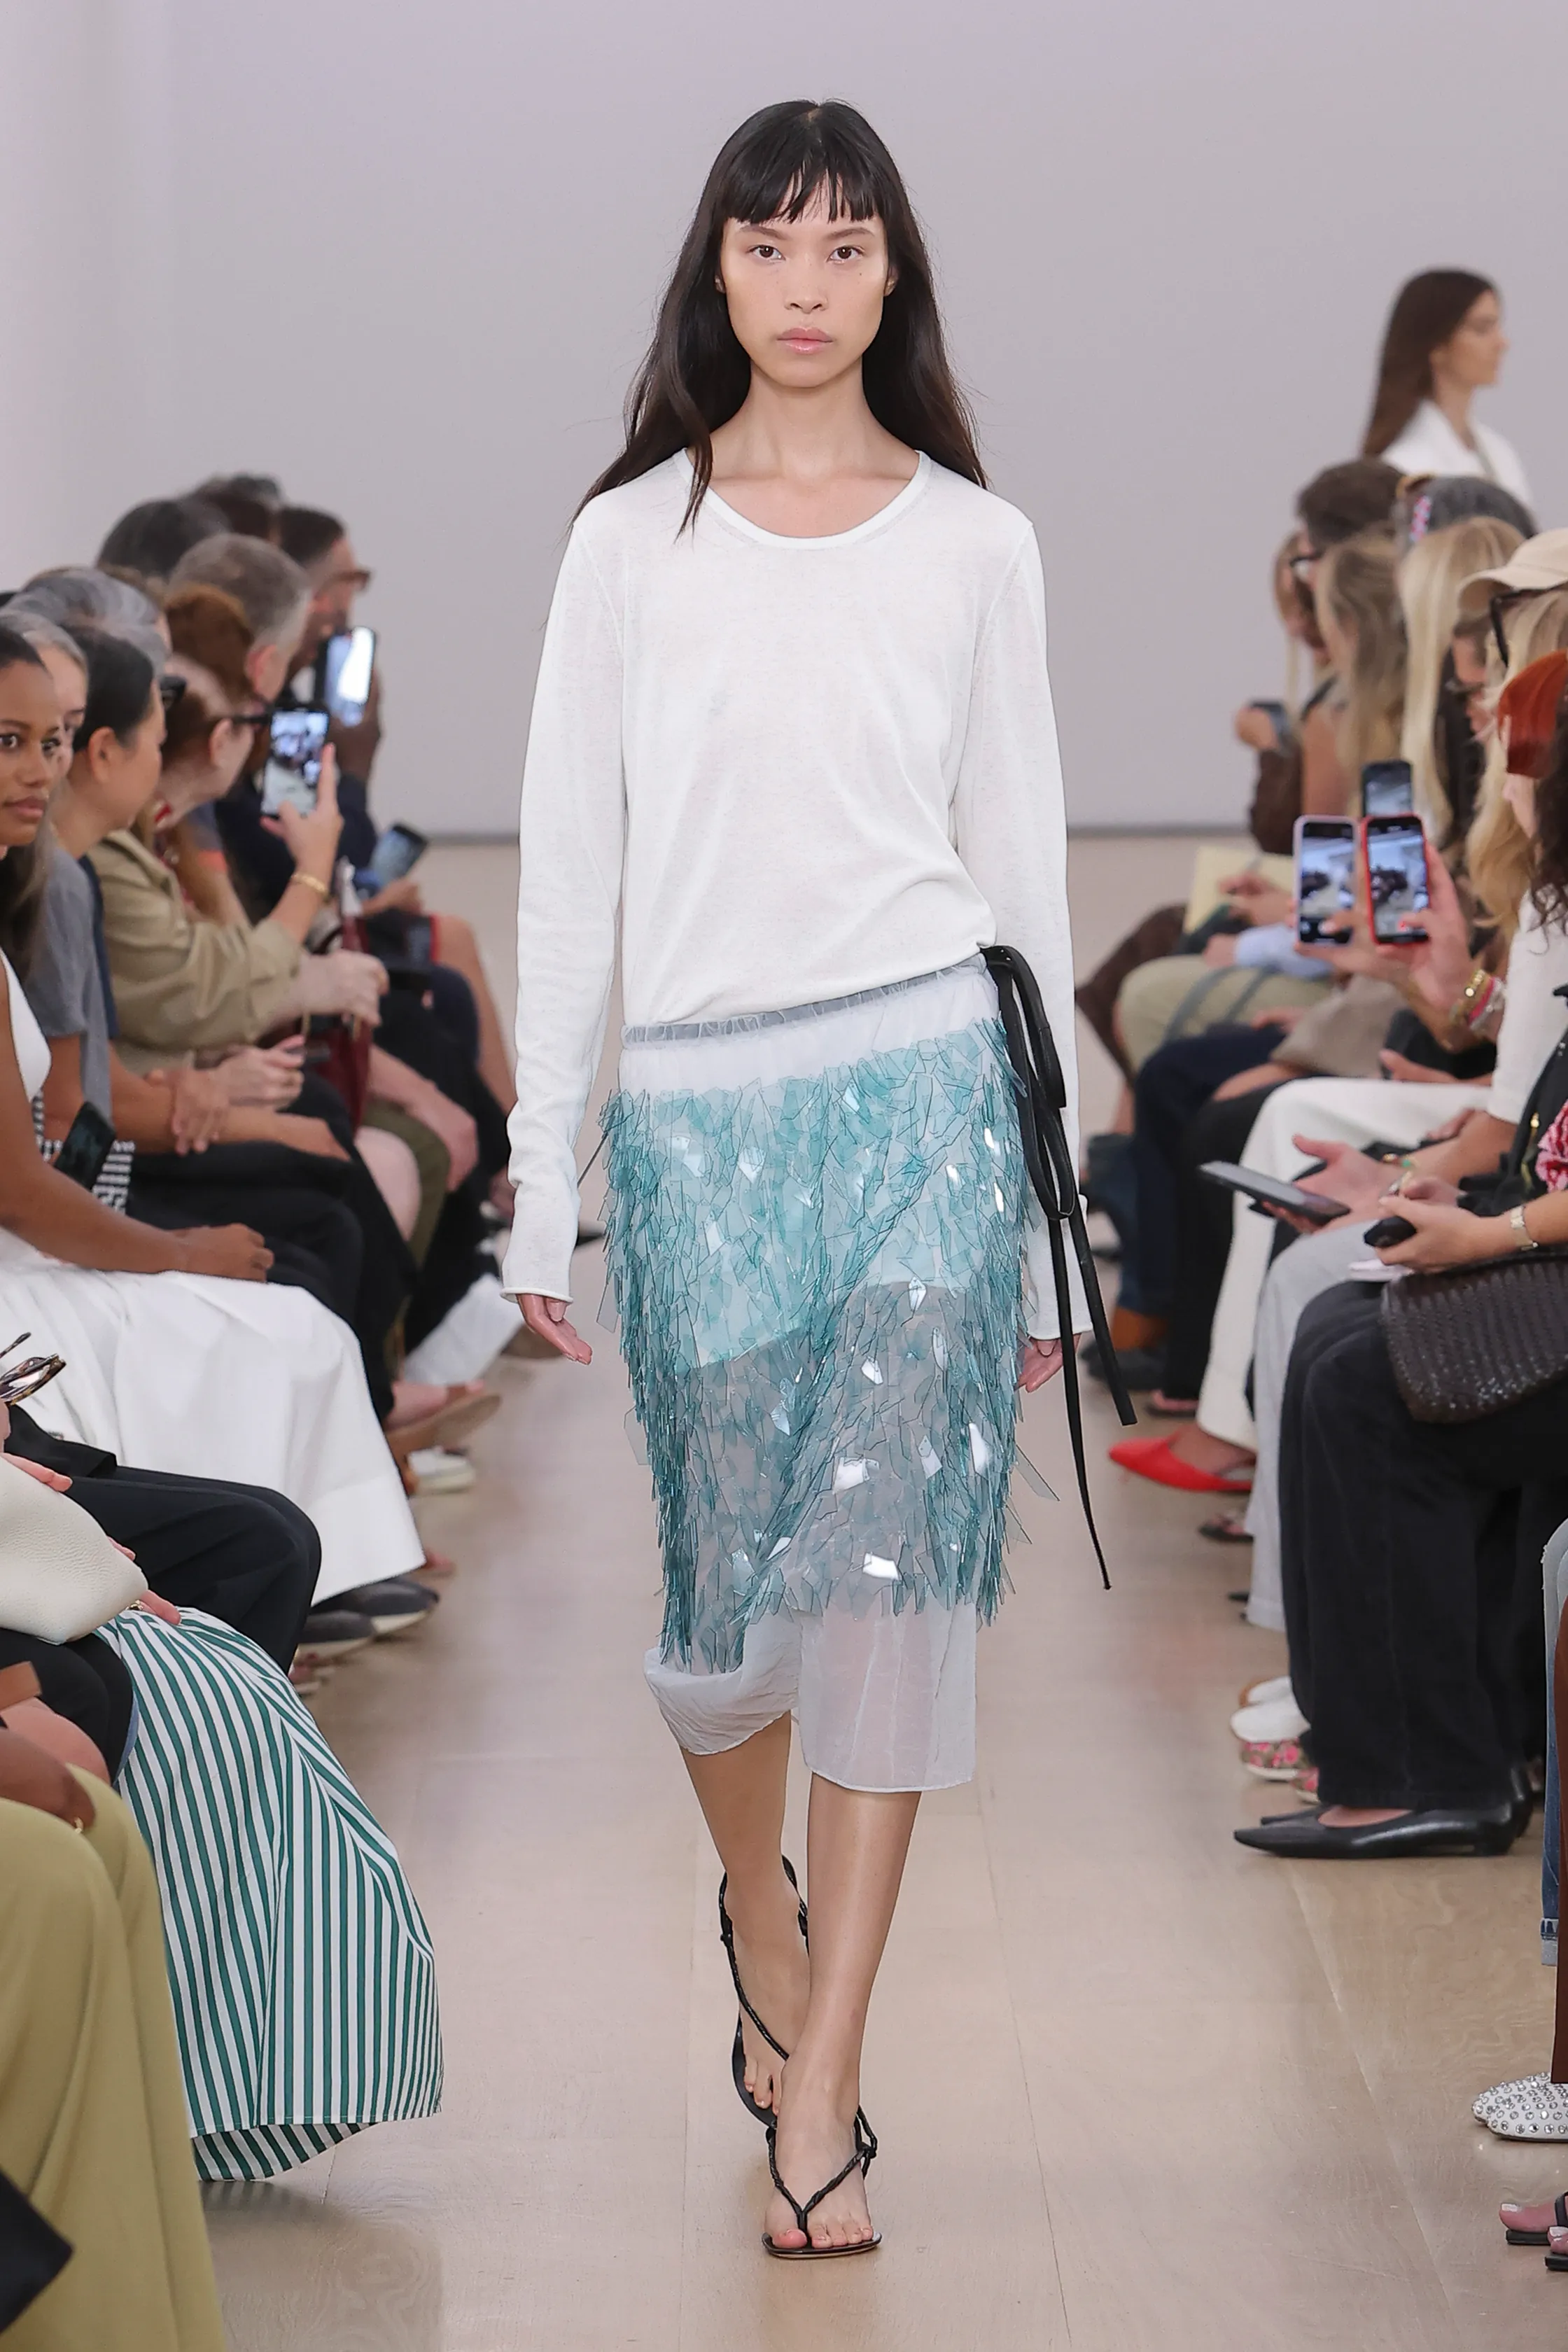 A model in Proenza Schouler Spring 2024 wearing a sheer skirt and white top.